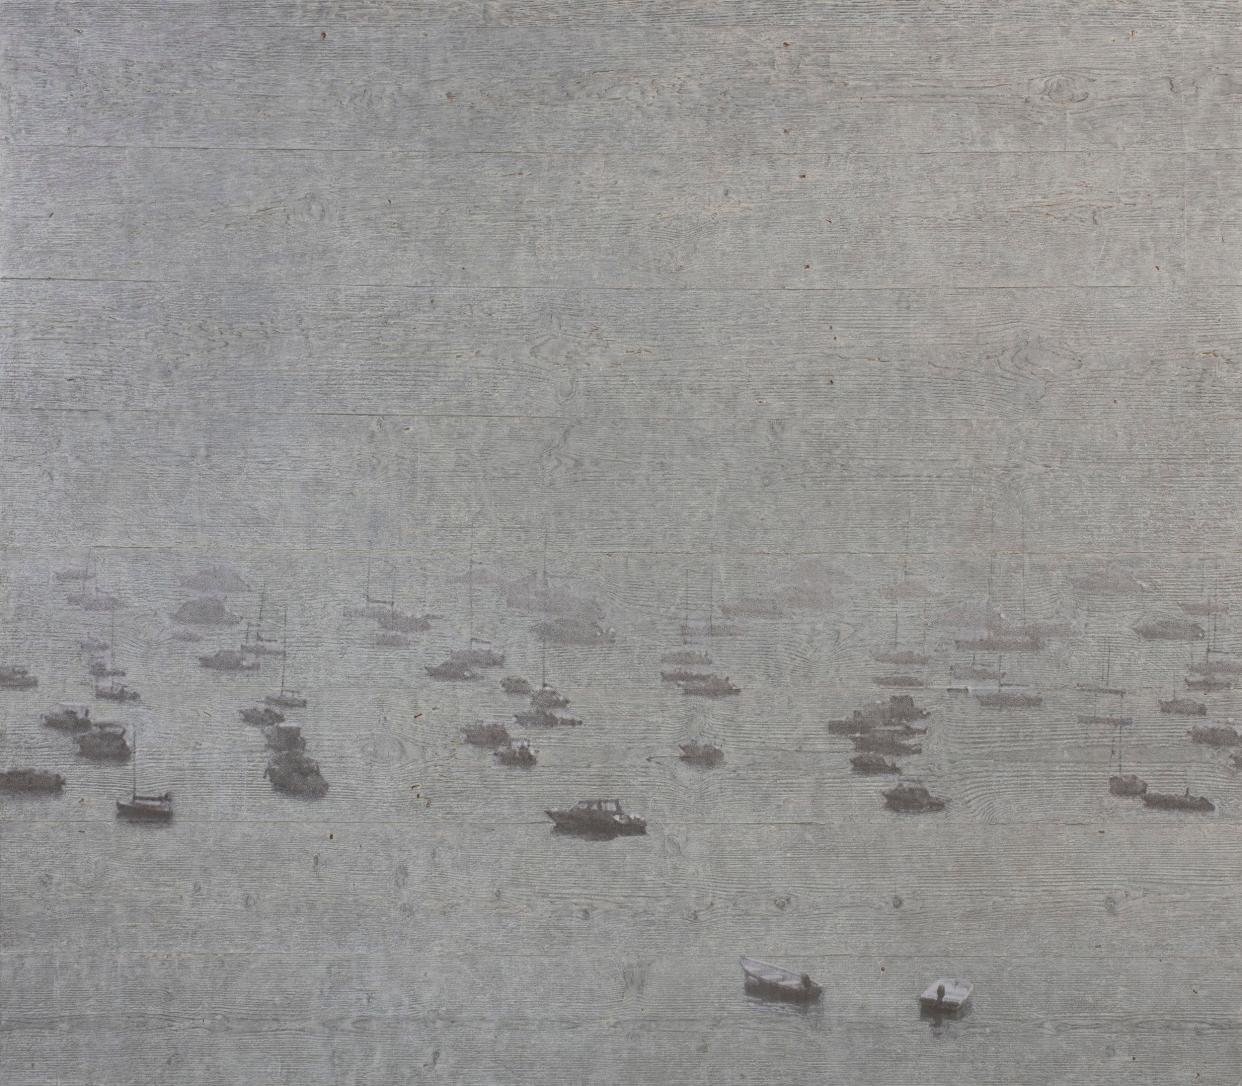 Sassoon Docks I, 2019, by Mick Moon: the grain of imprinted floorboards evokes the waves and ripples of his childhood by the sea